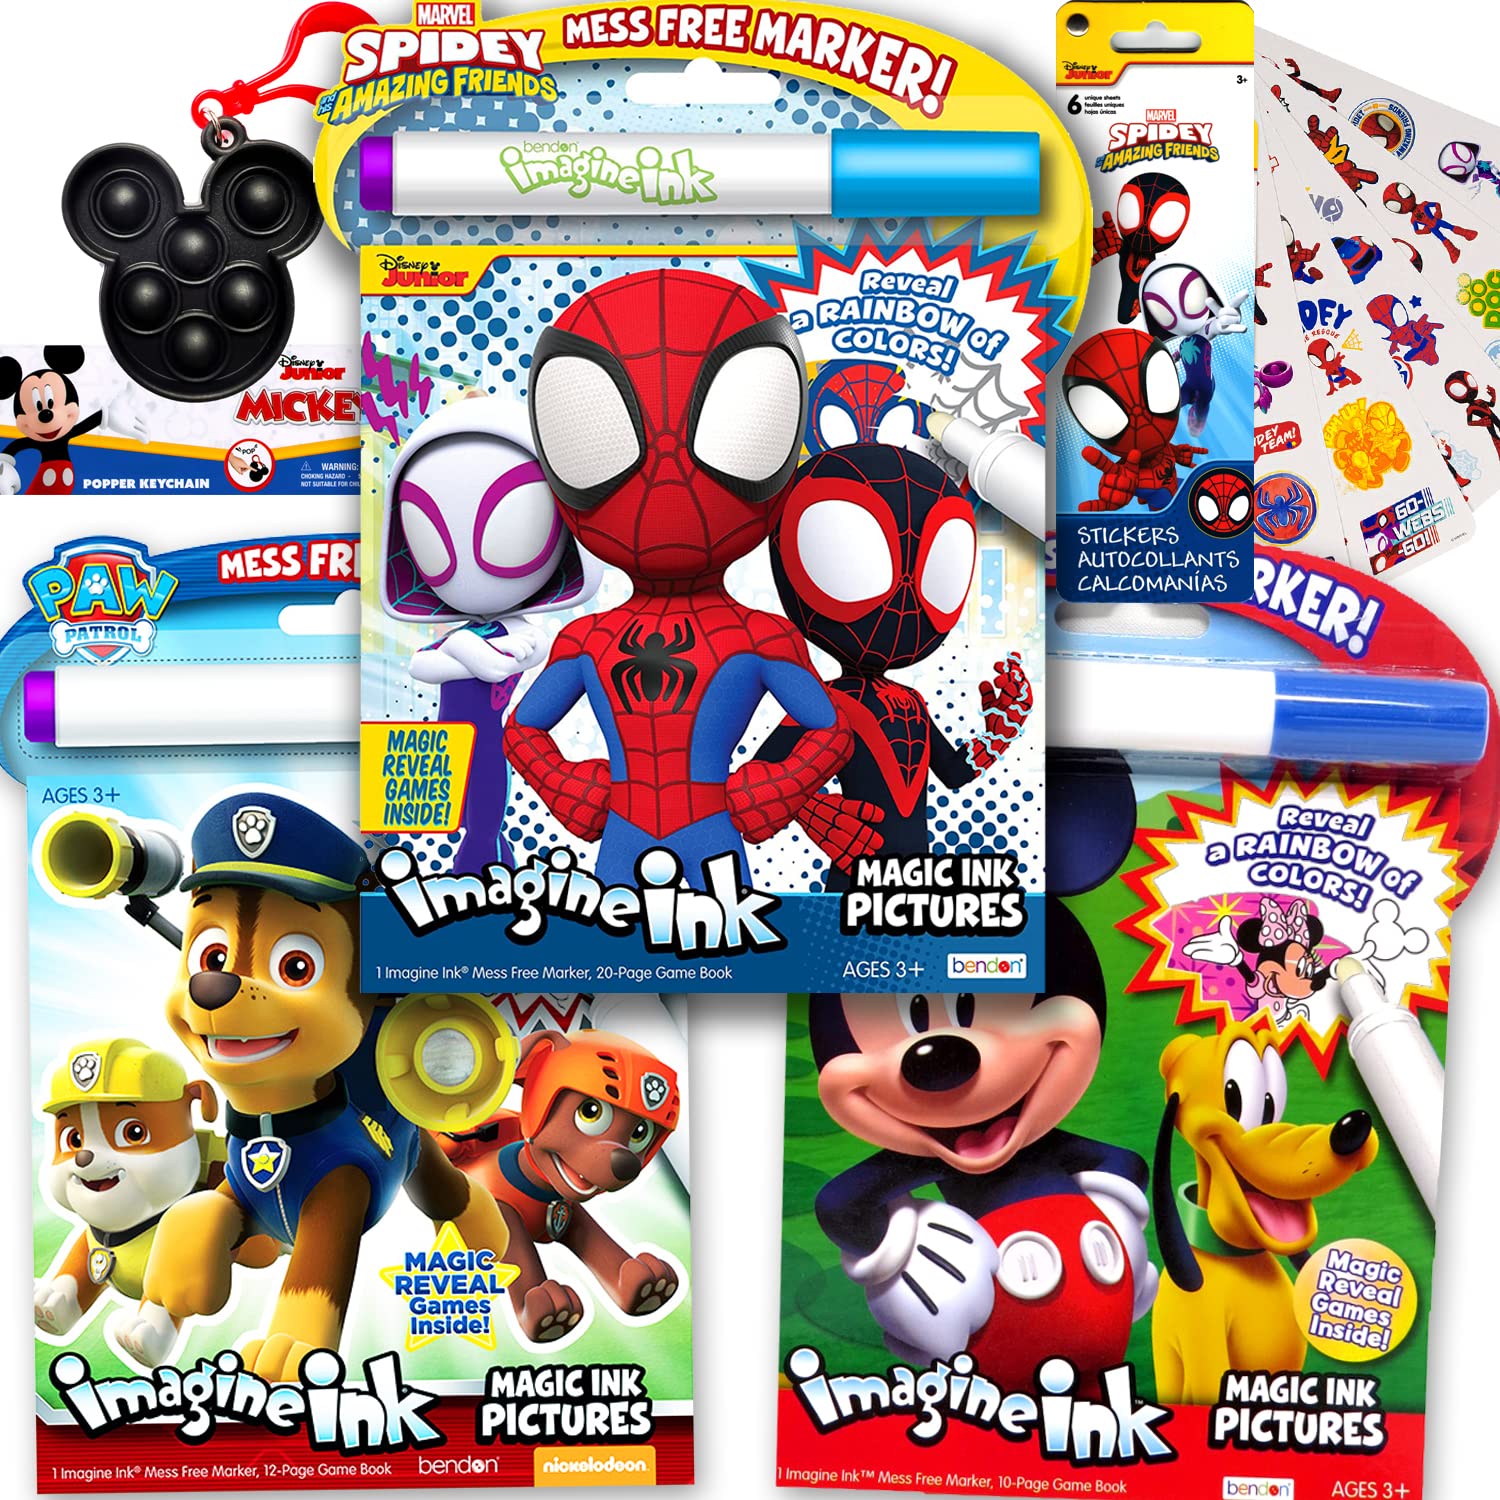 Bundle of 3 Imagine Ink Magic Pictures Coloring Activity Books Set for Boys, Kids, Toddlers - Spidey Amazing Friends, Paw Patrol, and Disney Mickey Mouse